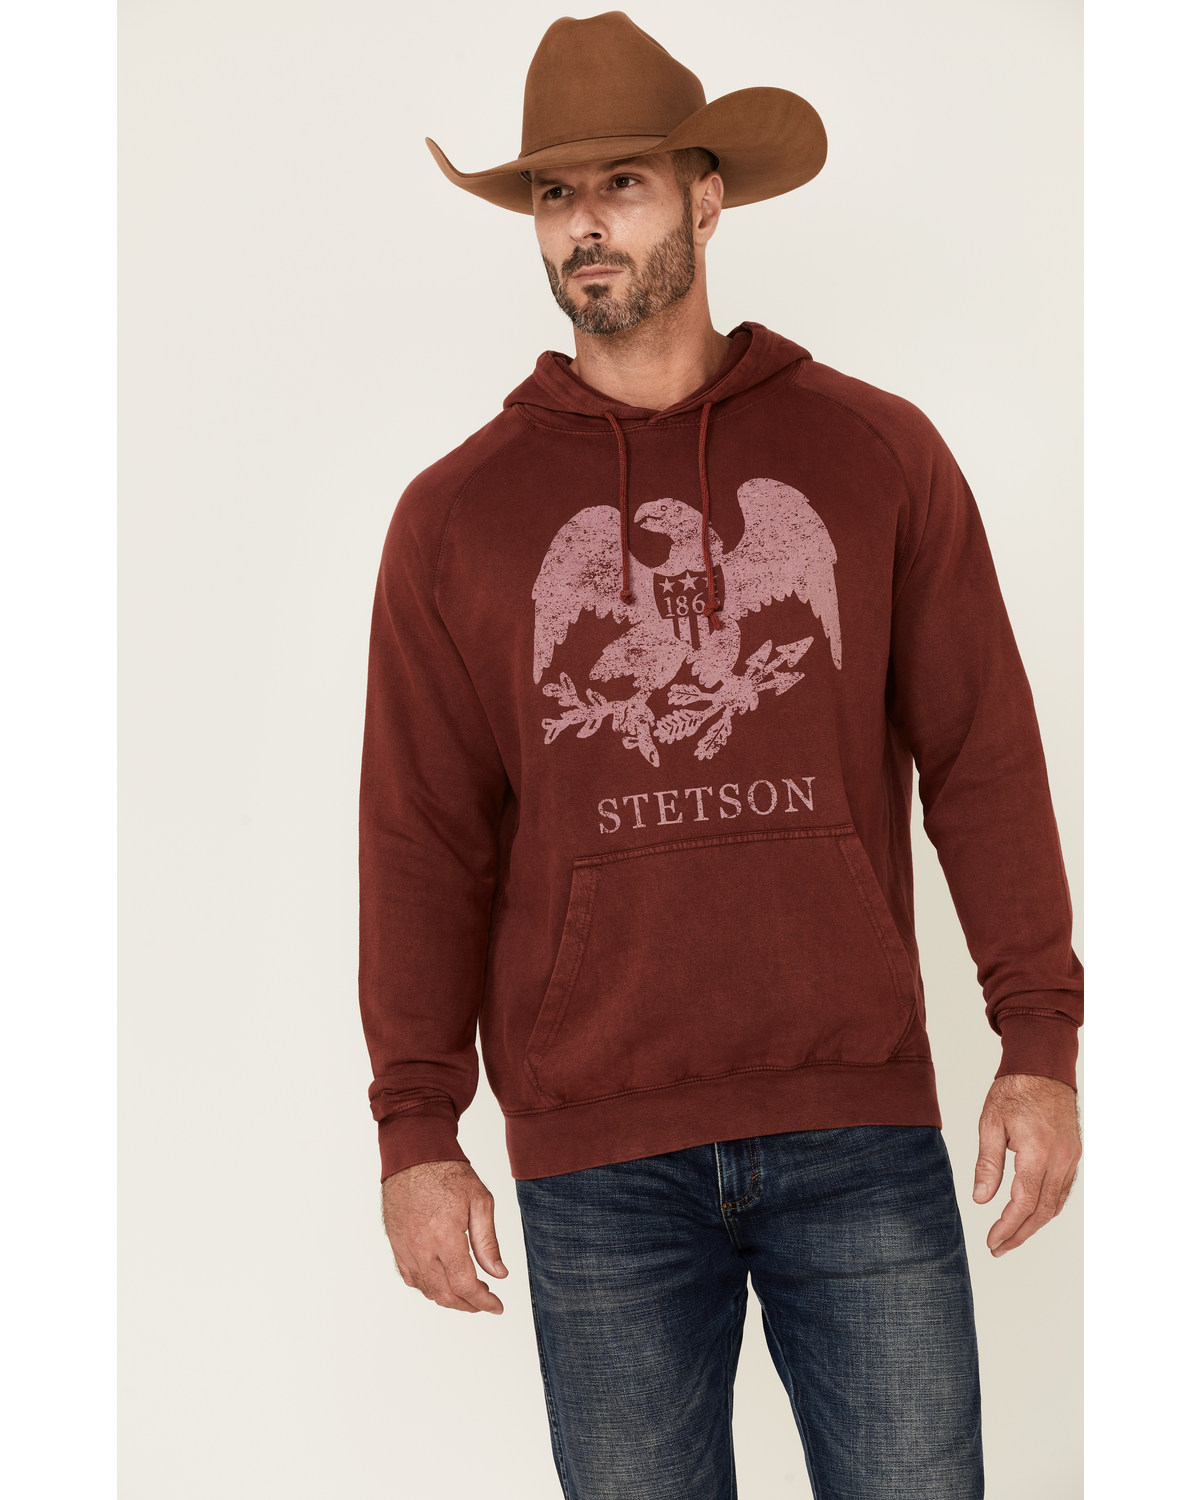 Stetson Men's Red Mineral Wash Distressed Eagle Graphic Hooded Sweatshirt